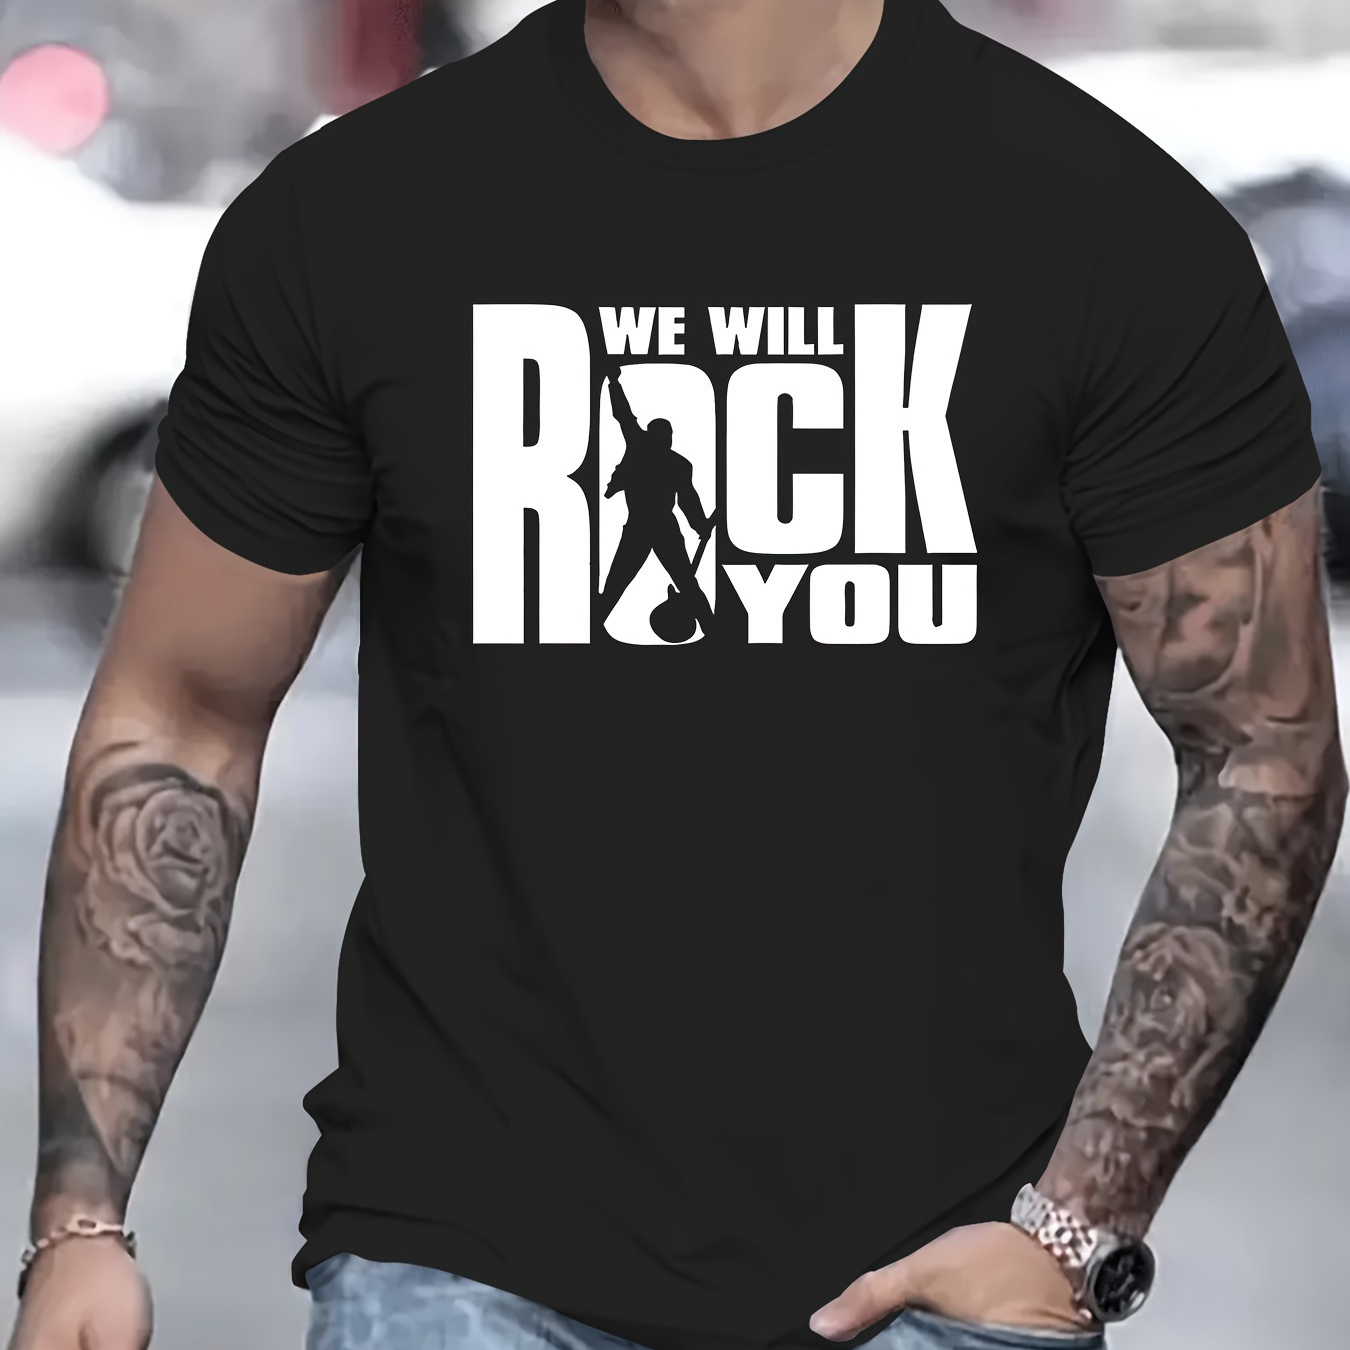 

We Will Rock You" Creative Print Casual Novelty T-shirt For Men, Short Sleeve Summer& Spring Top, Comfort Fit, Stylish Streetwear Crew Neck Tee For Daily Wear